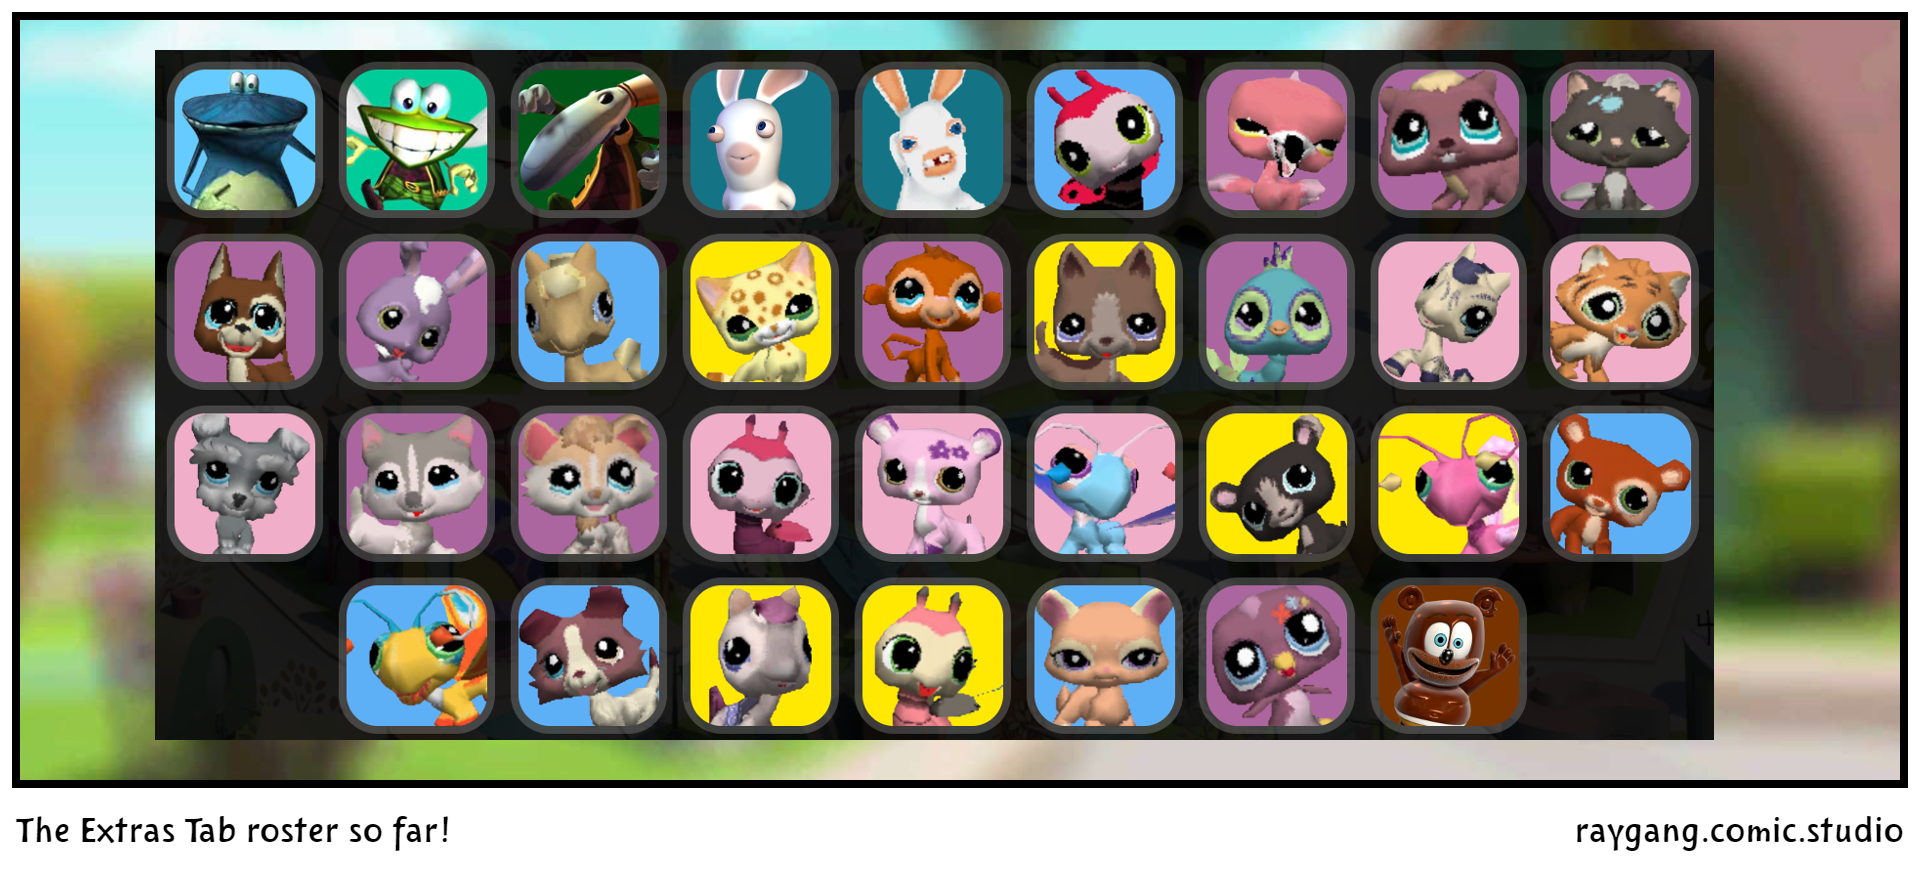 The Extras Tab roster so far!